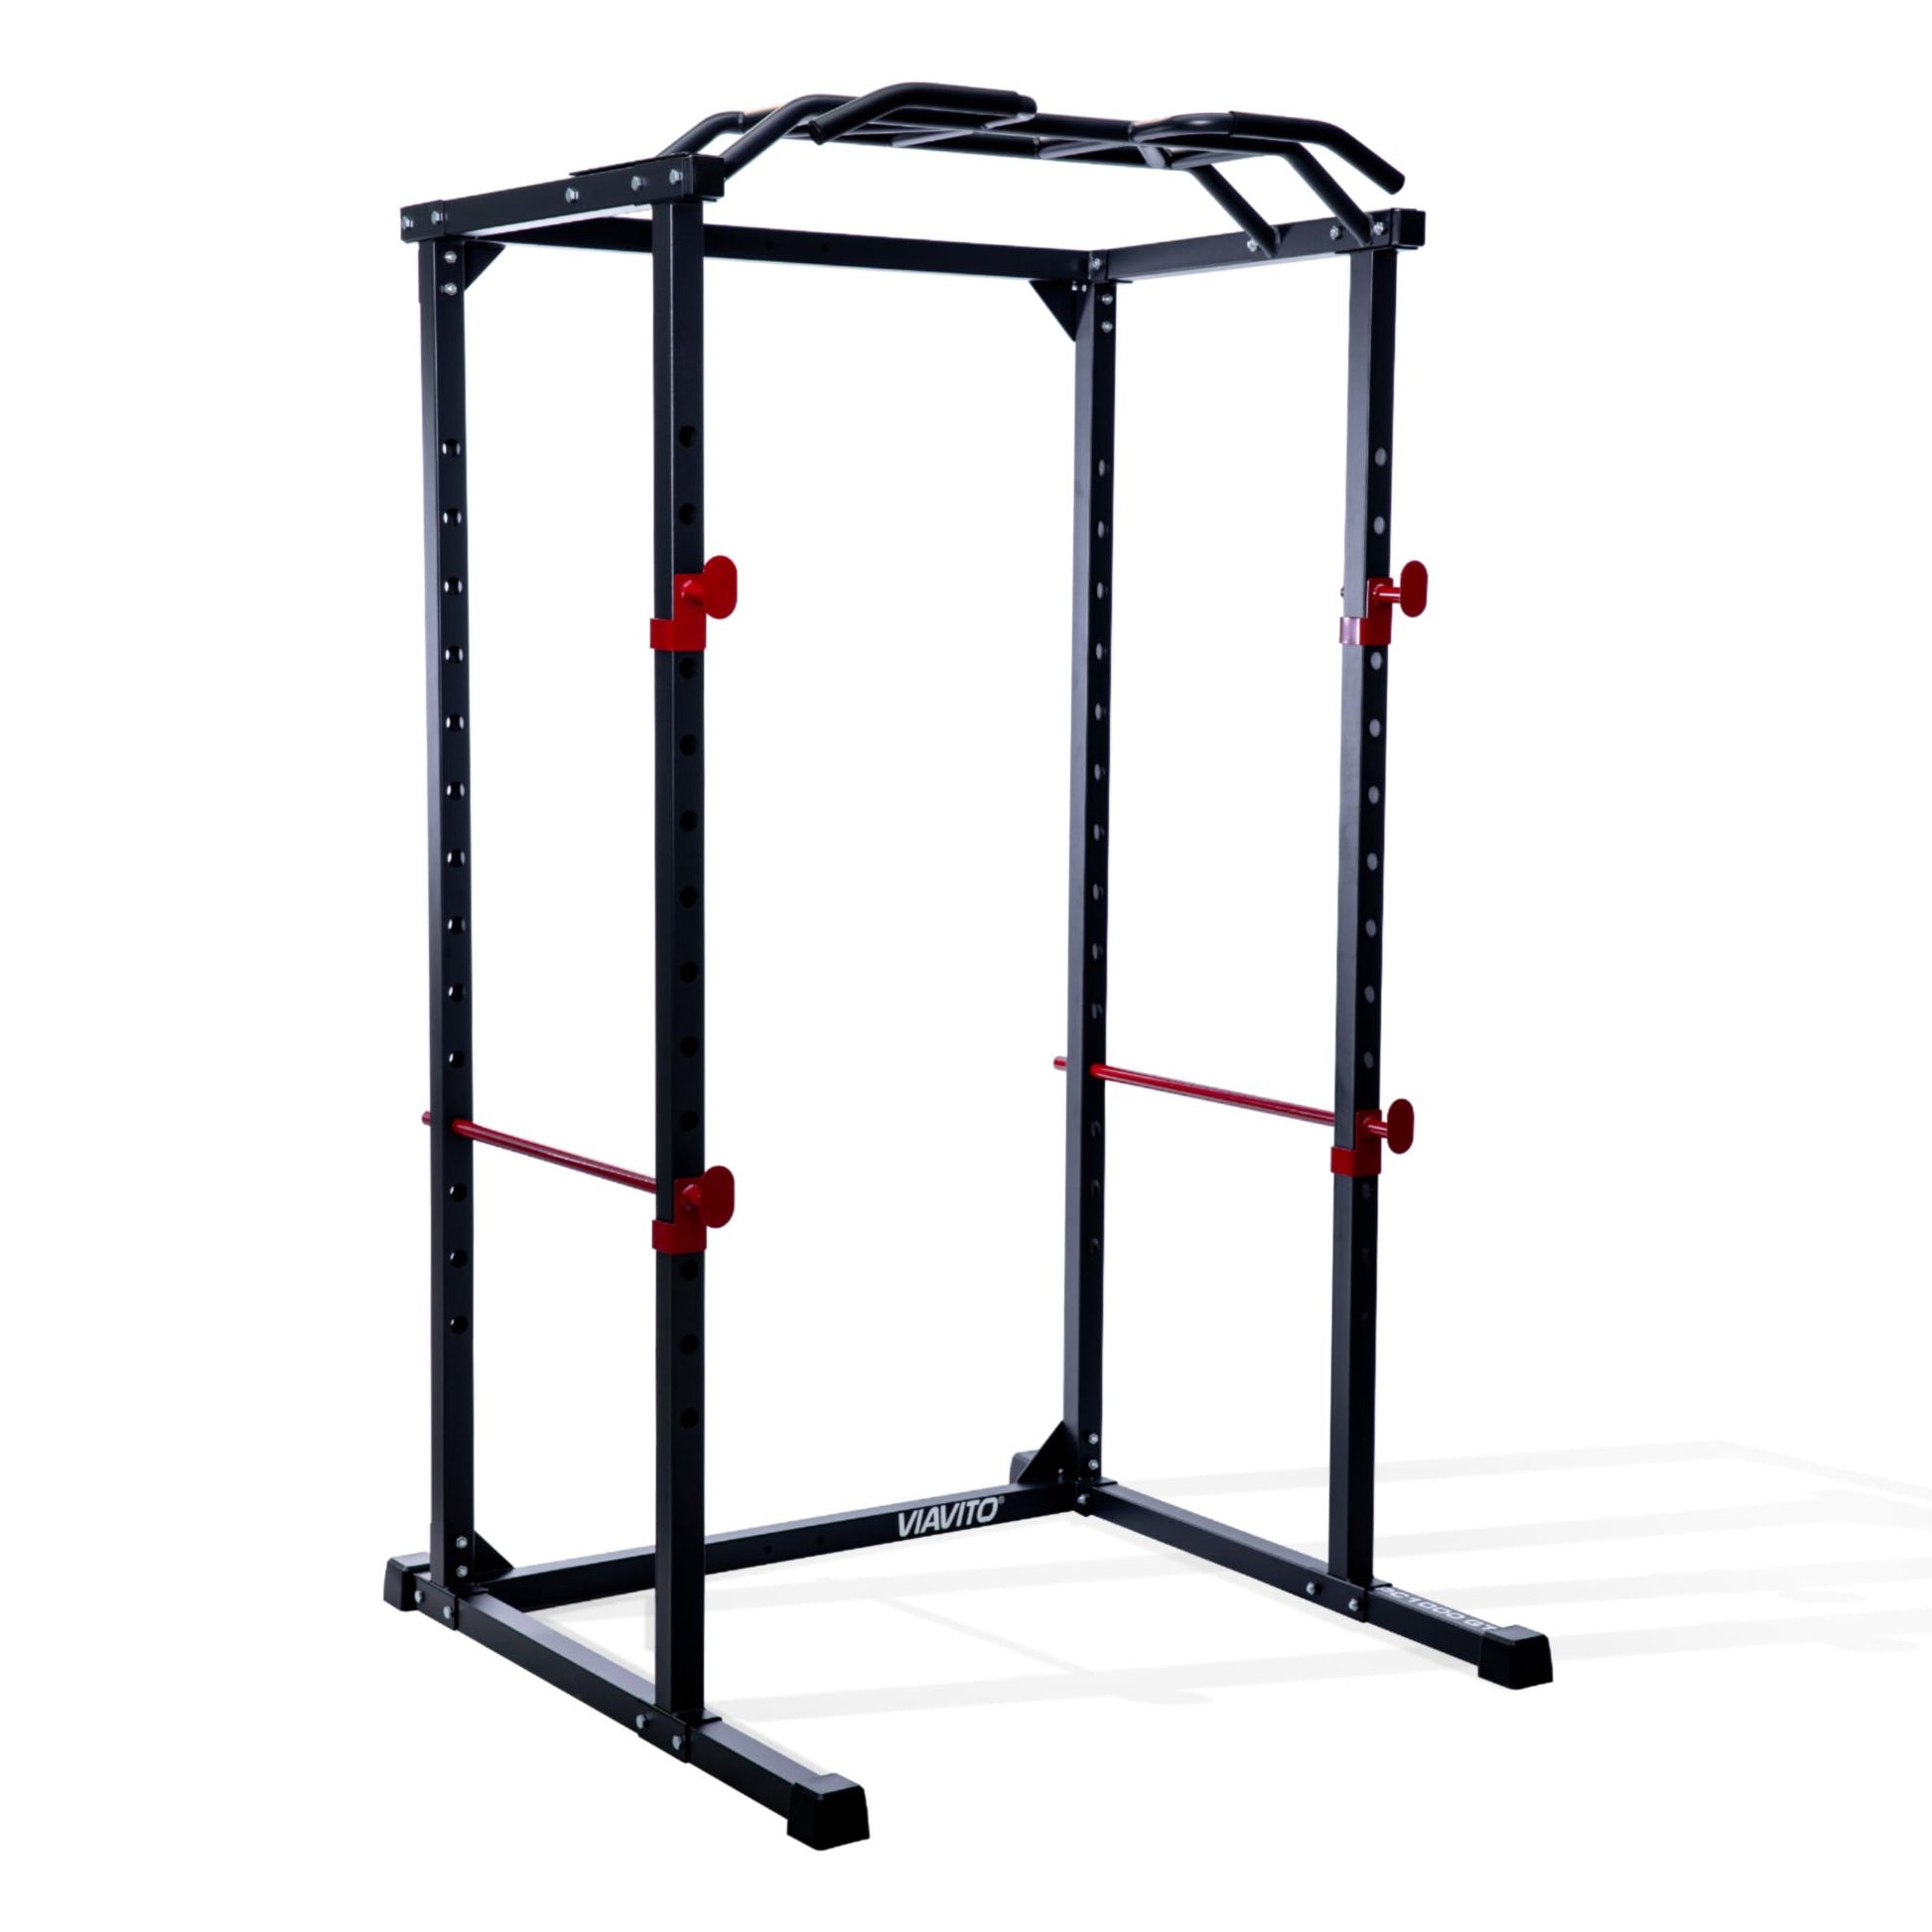 |Viavito PC1000 GT Power Cage - angle updated|